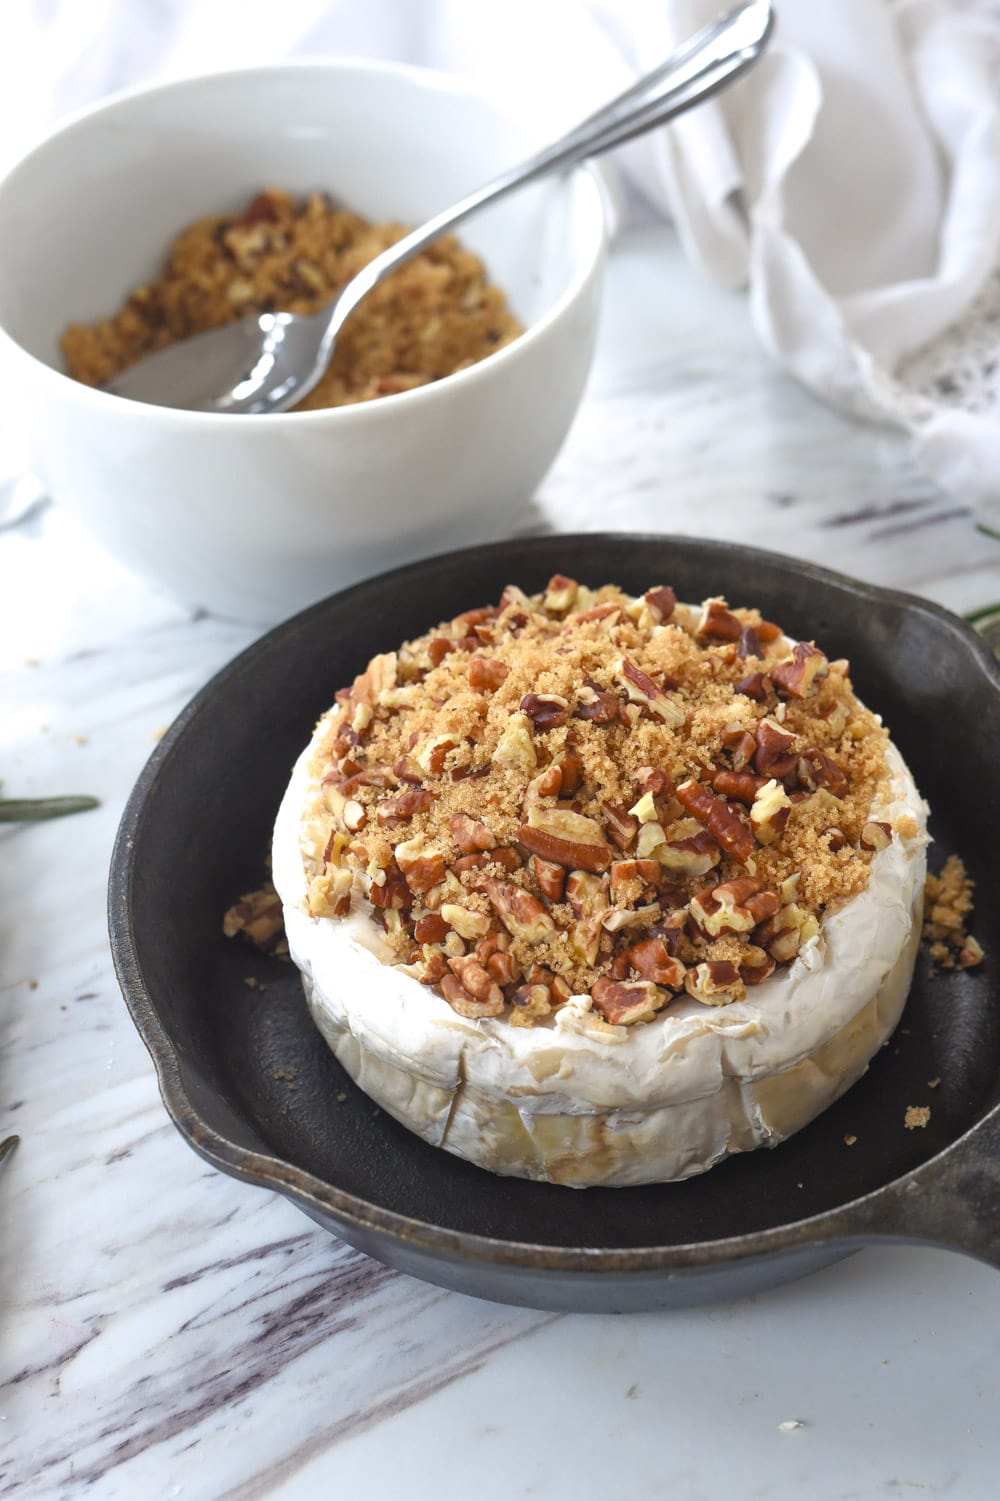 brie filled with brown sugar and pecans